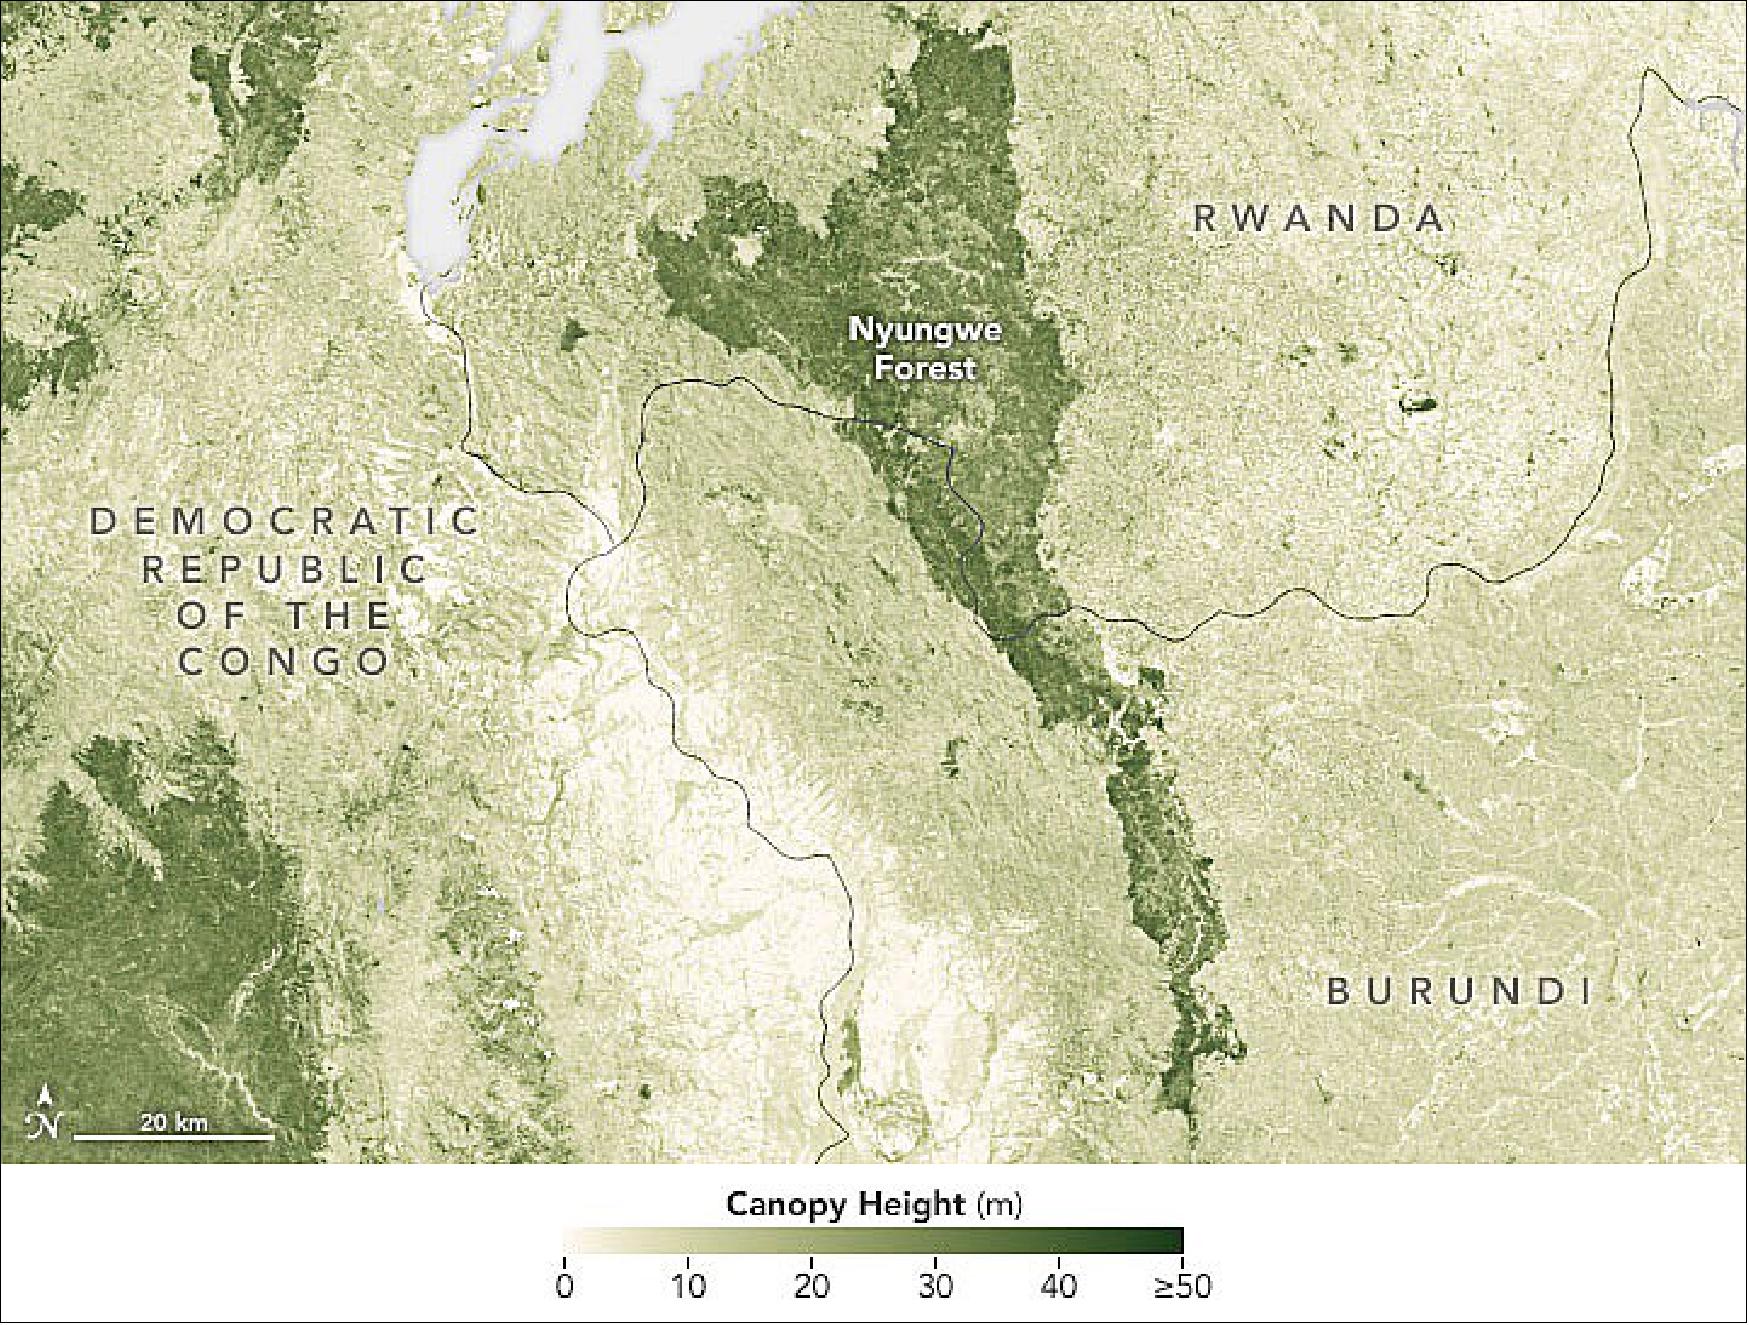 Figure 9: Detailed views also reveal that taller canopy heights often occur within the borders of protected areas. This map, for example, shows the comparatively taller trees of Nyungwe Forest in Rwanda. Declared a forest reserve in 1903, clearing was restricted but the law was not consistently enforced. In 2005, the forest was declared a national park. Since then, various projects have aimed to better protect the trees and to boost ecotourism and education on biodiversity in the park (image credit: NASA Earth Observatory)